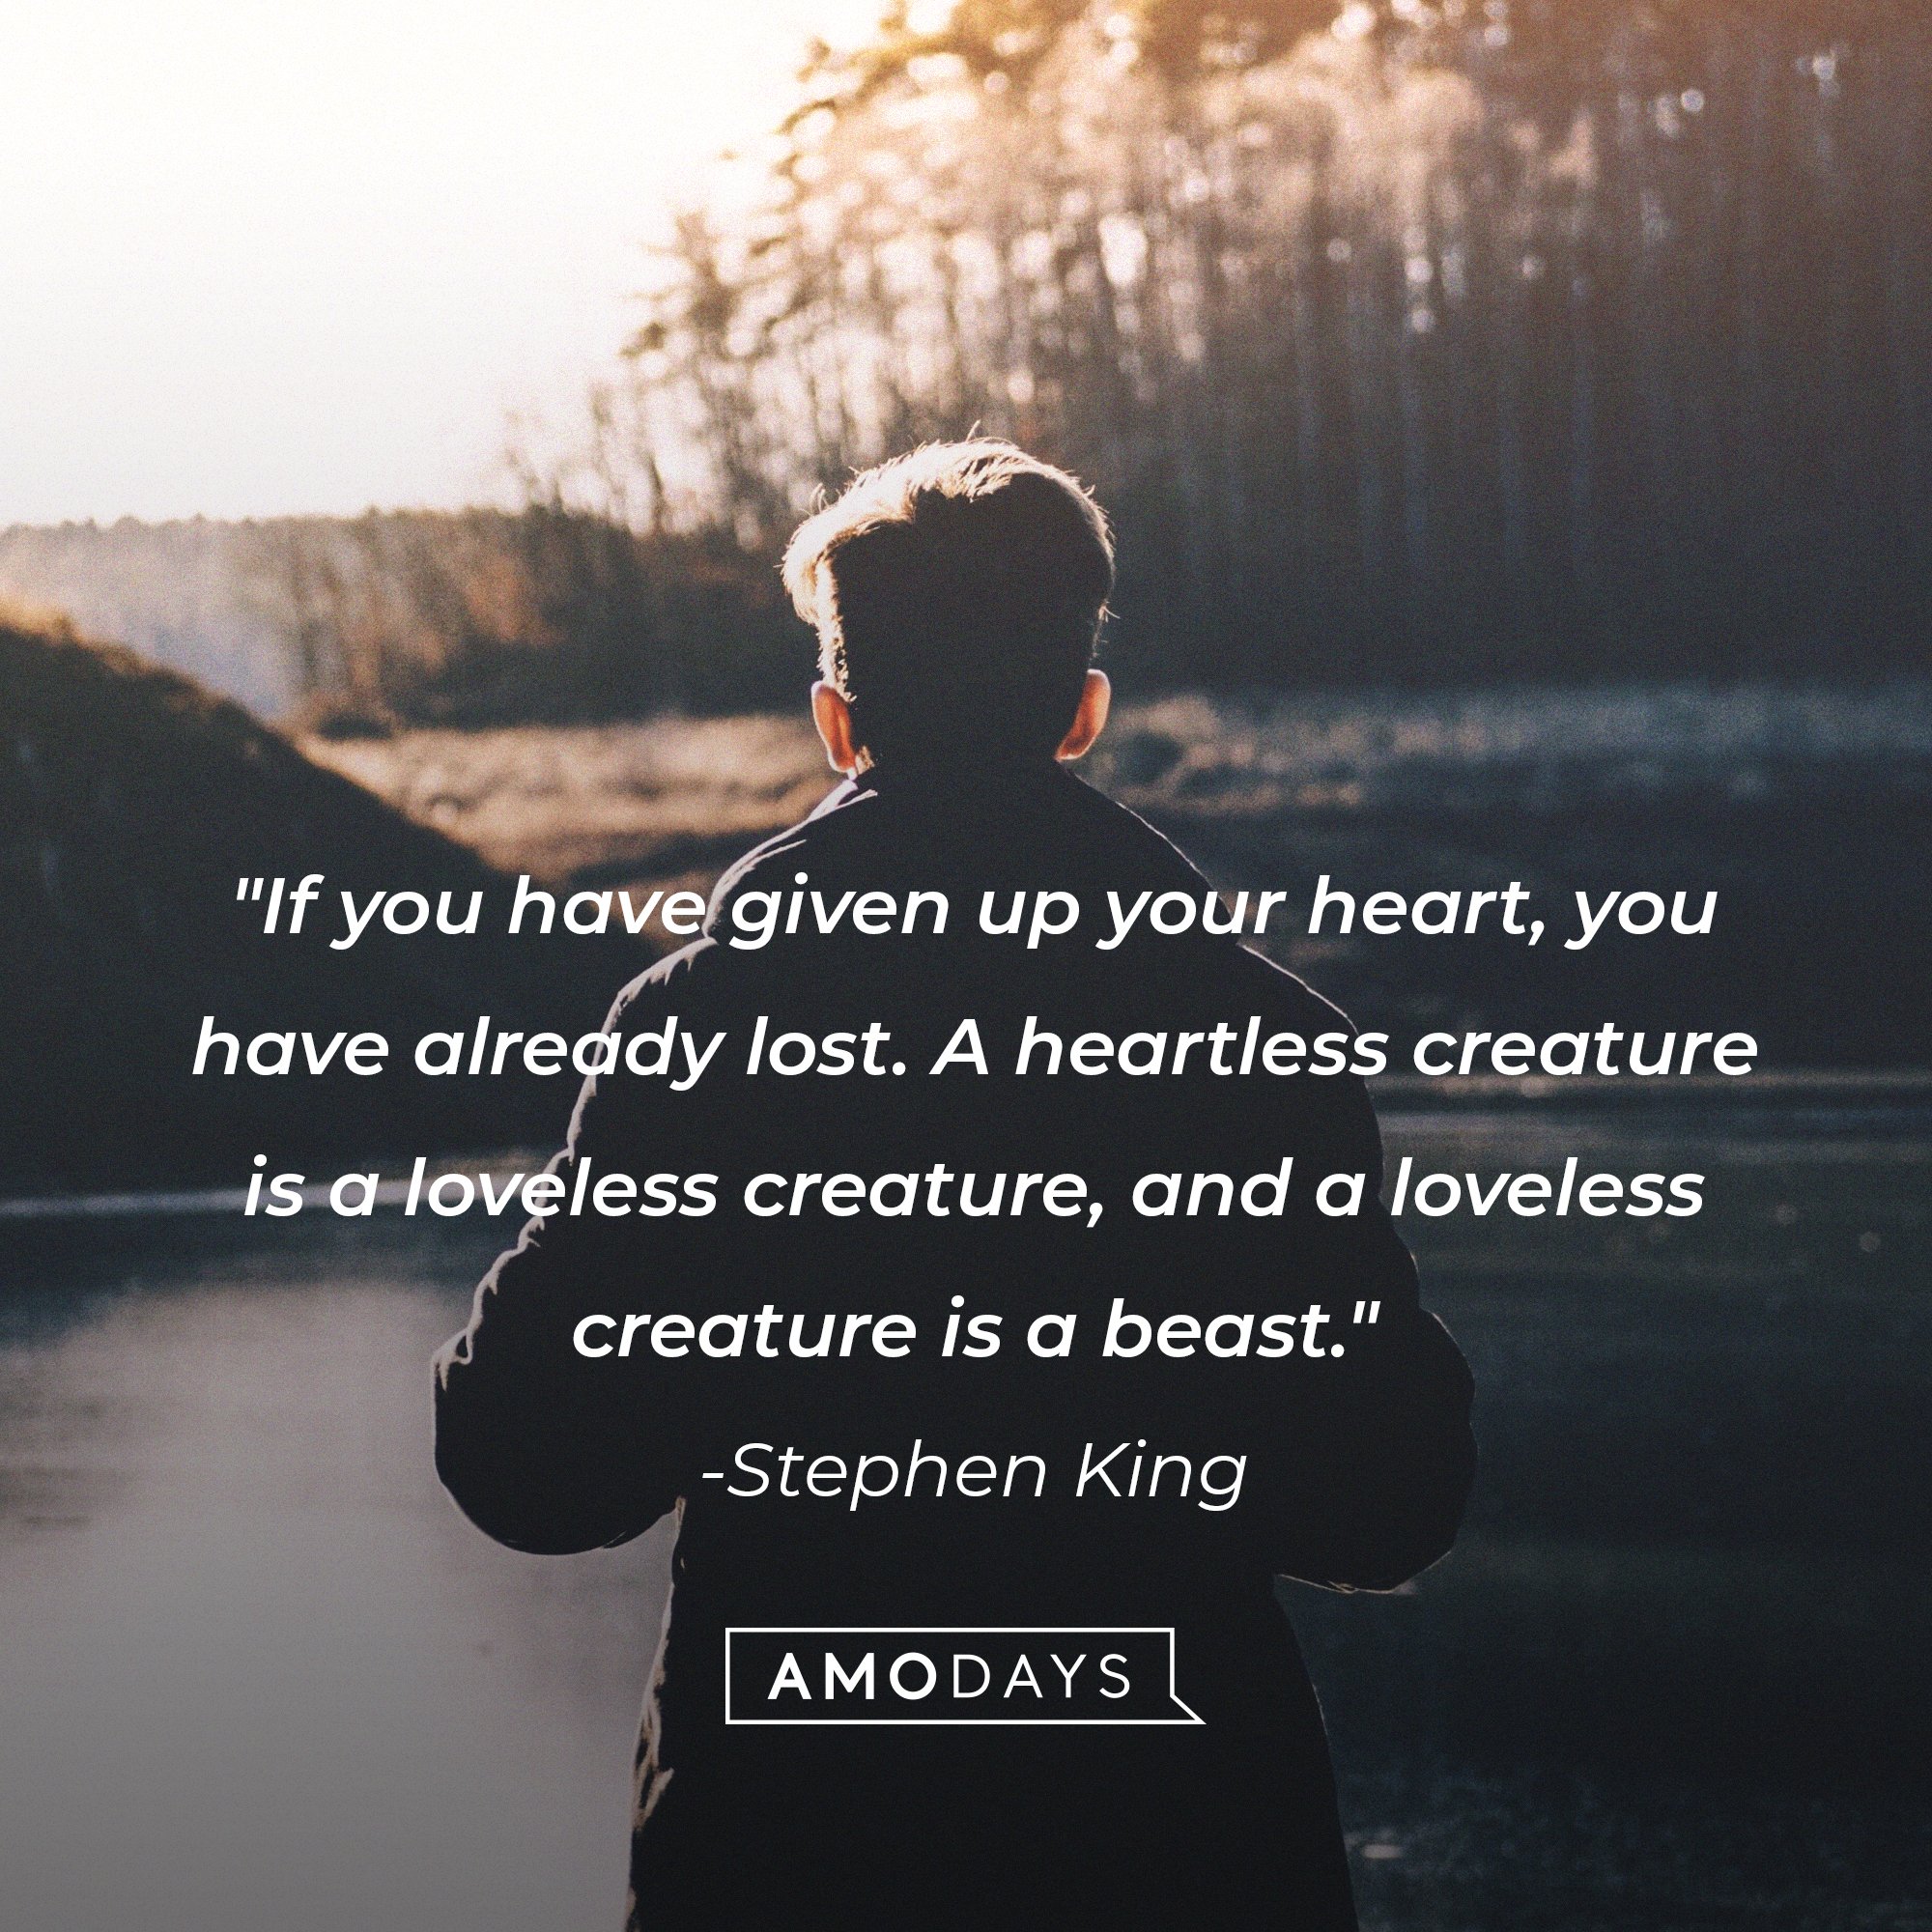 Stephen King's quote: "If you have given up your heart, you have already lost. A heartless creature is a loveless creature, and a loveless creature is a beast." | Image: AmoDays